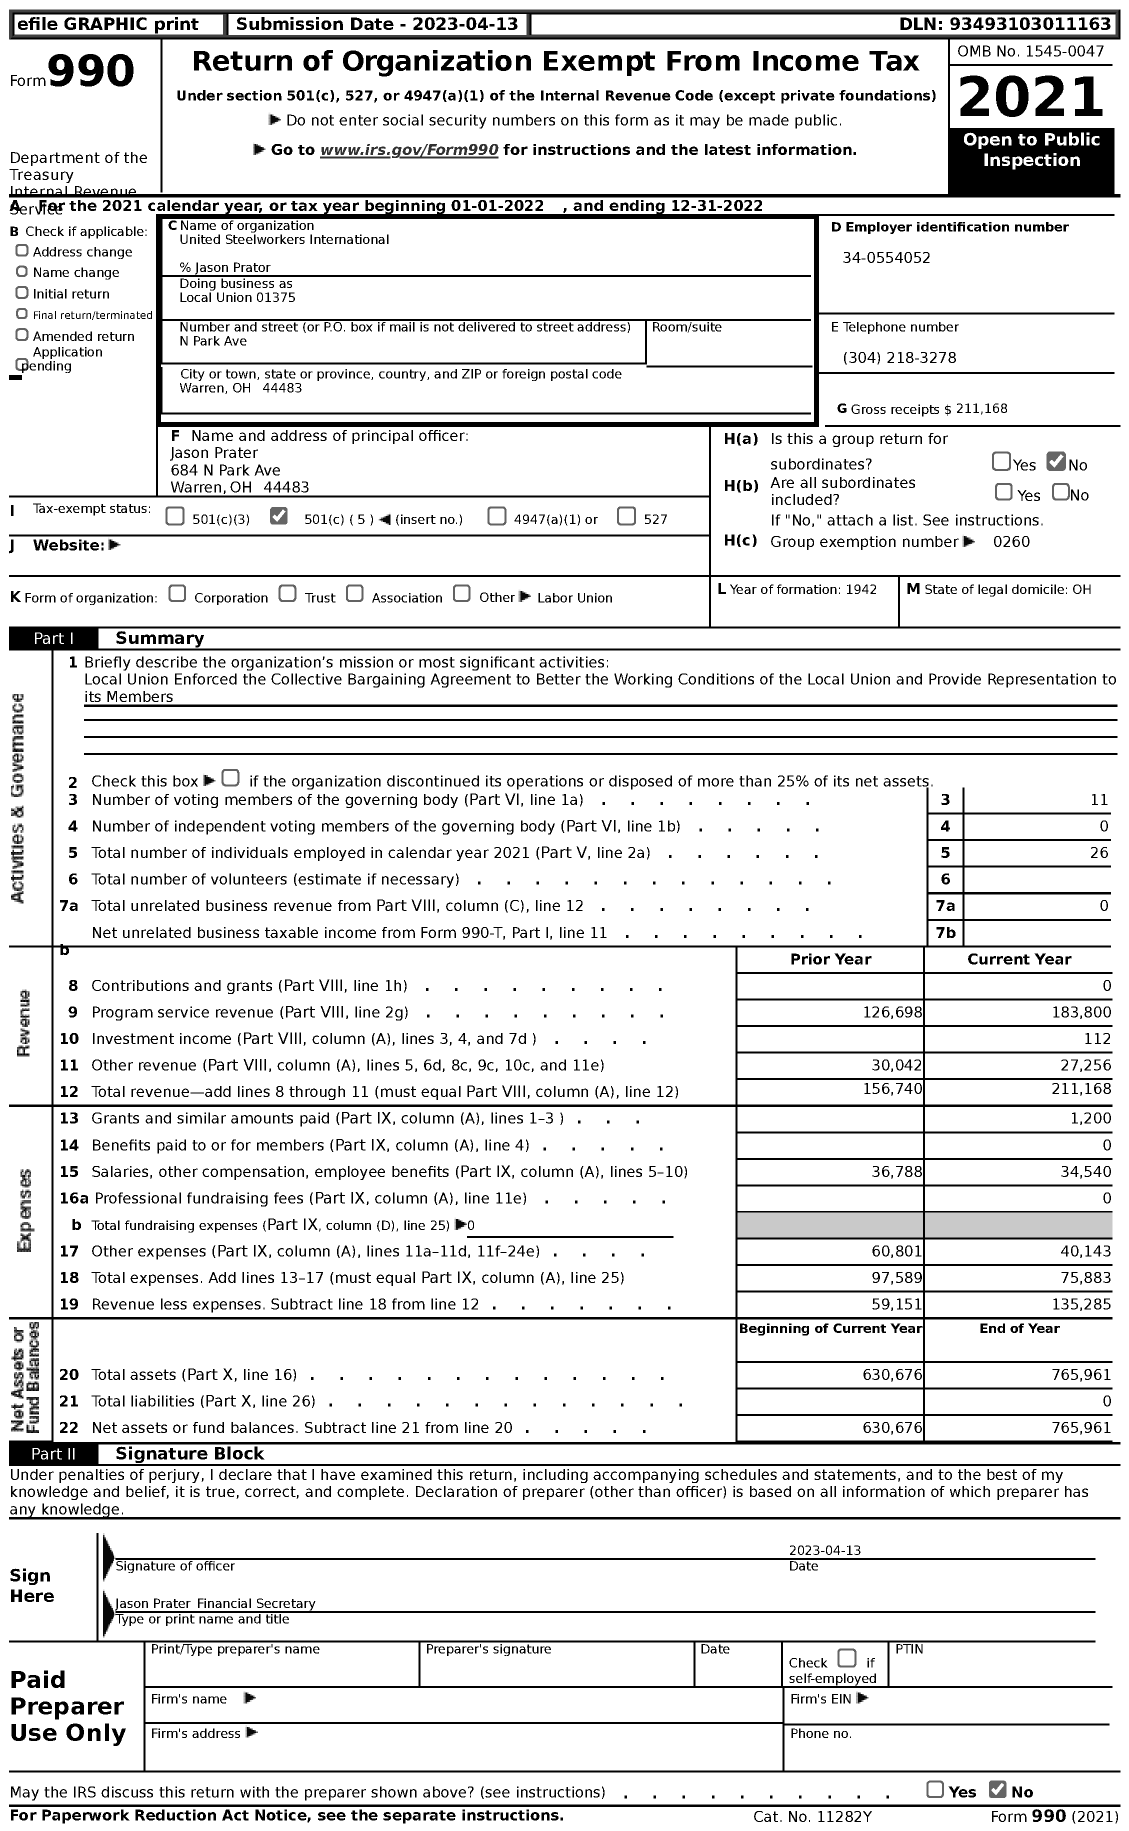 Image of first page of 2022 Form 990 for United Steelworkers - Local Union 01375